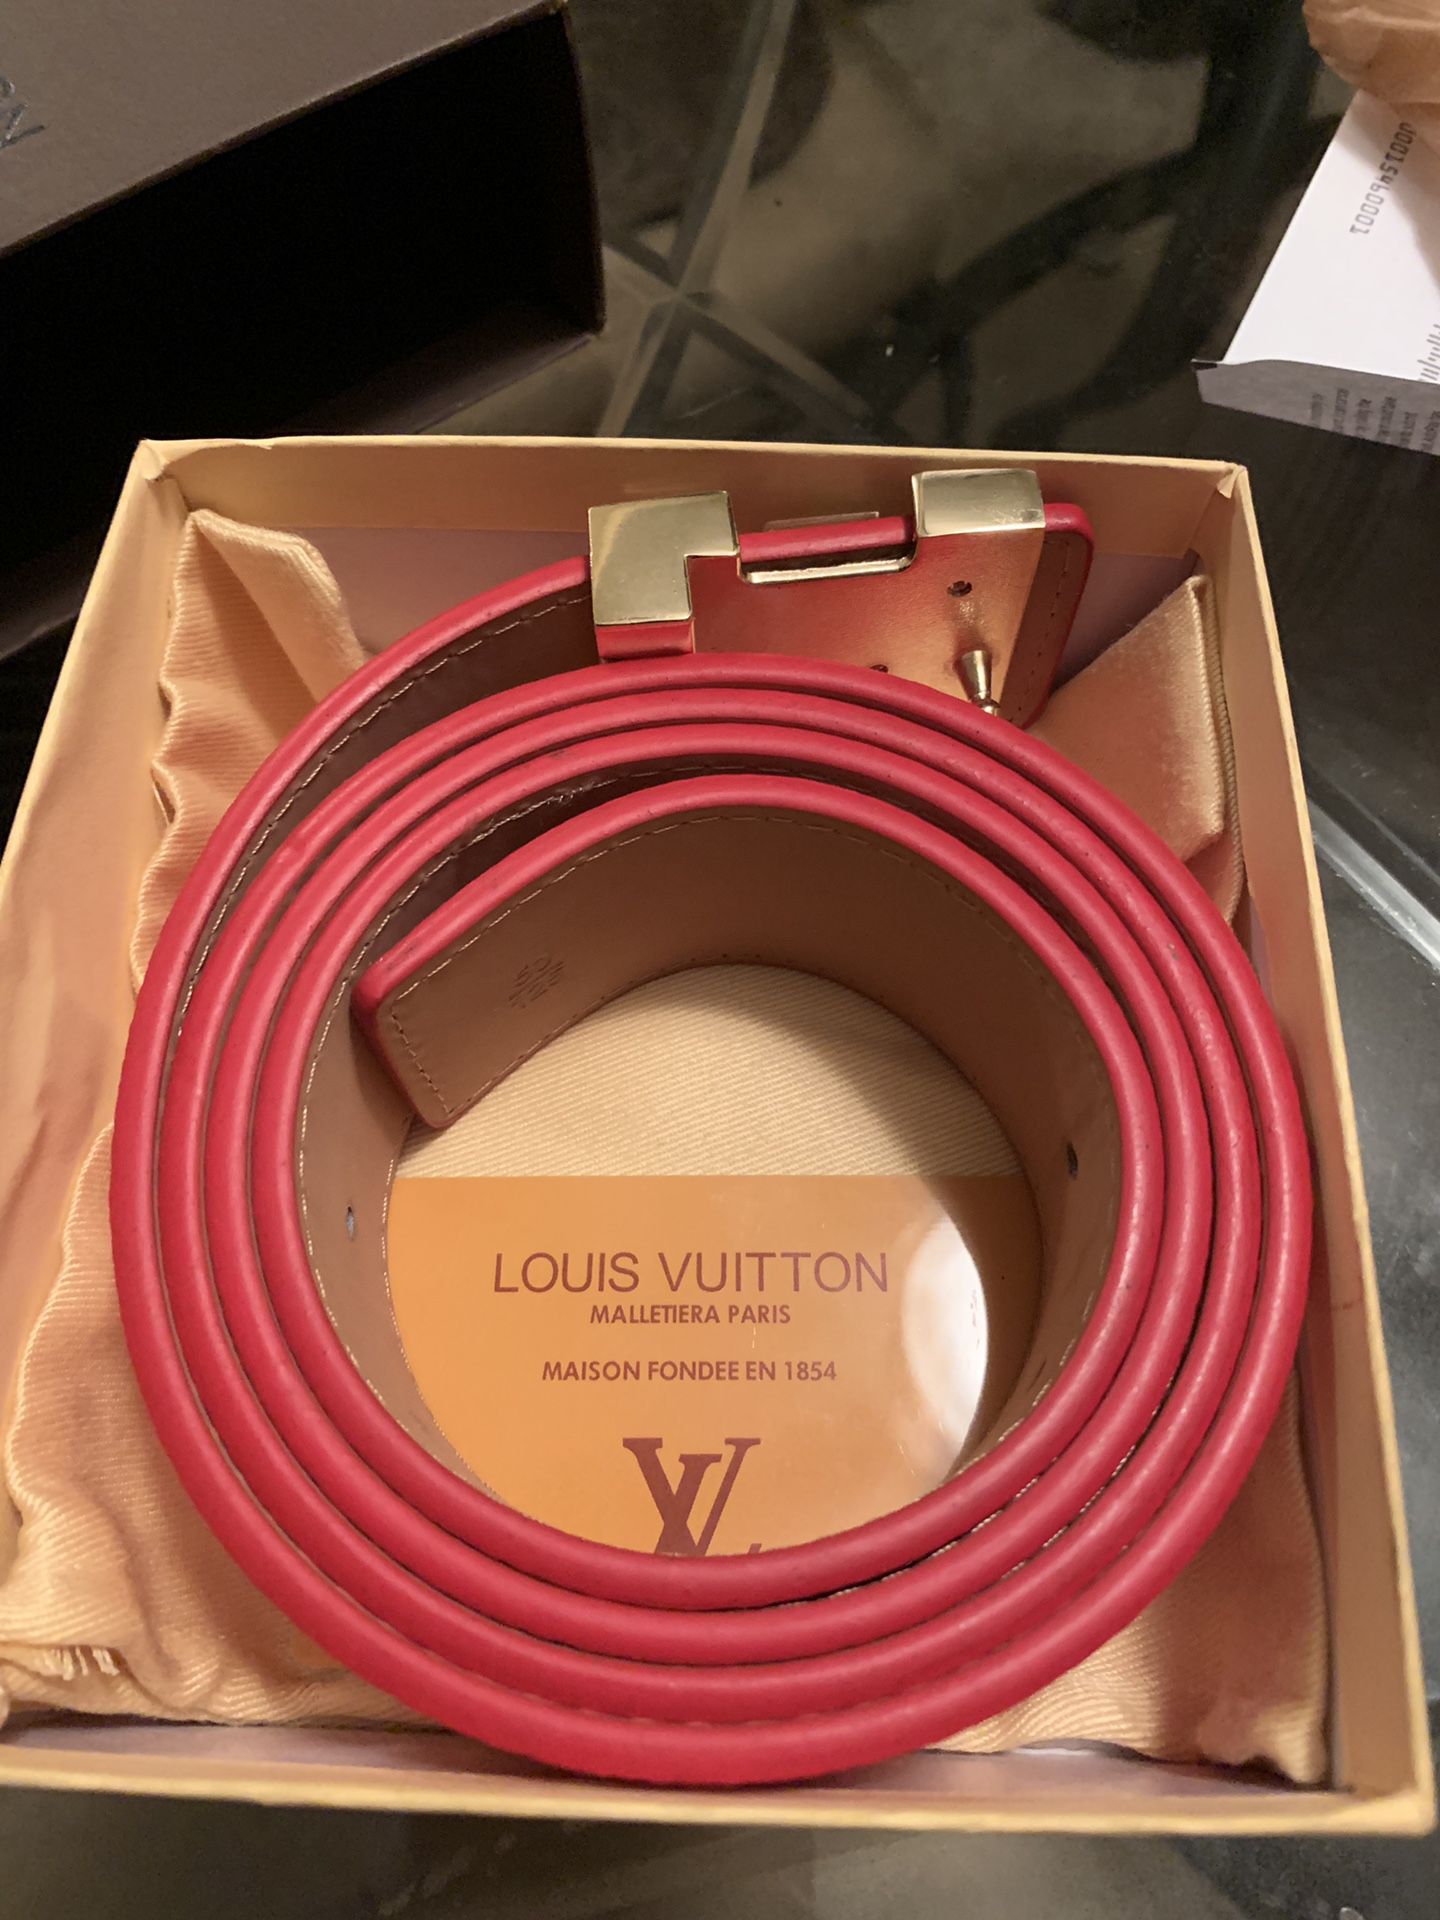 Red Supreme LV belt for Sale in Stone Mountain, GA - OfferUp